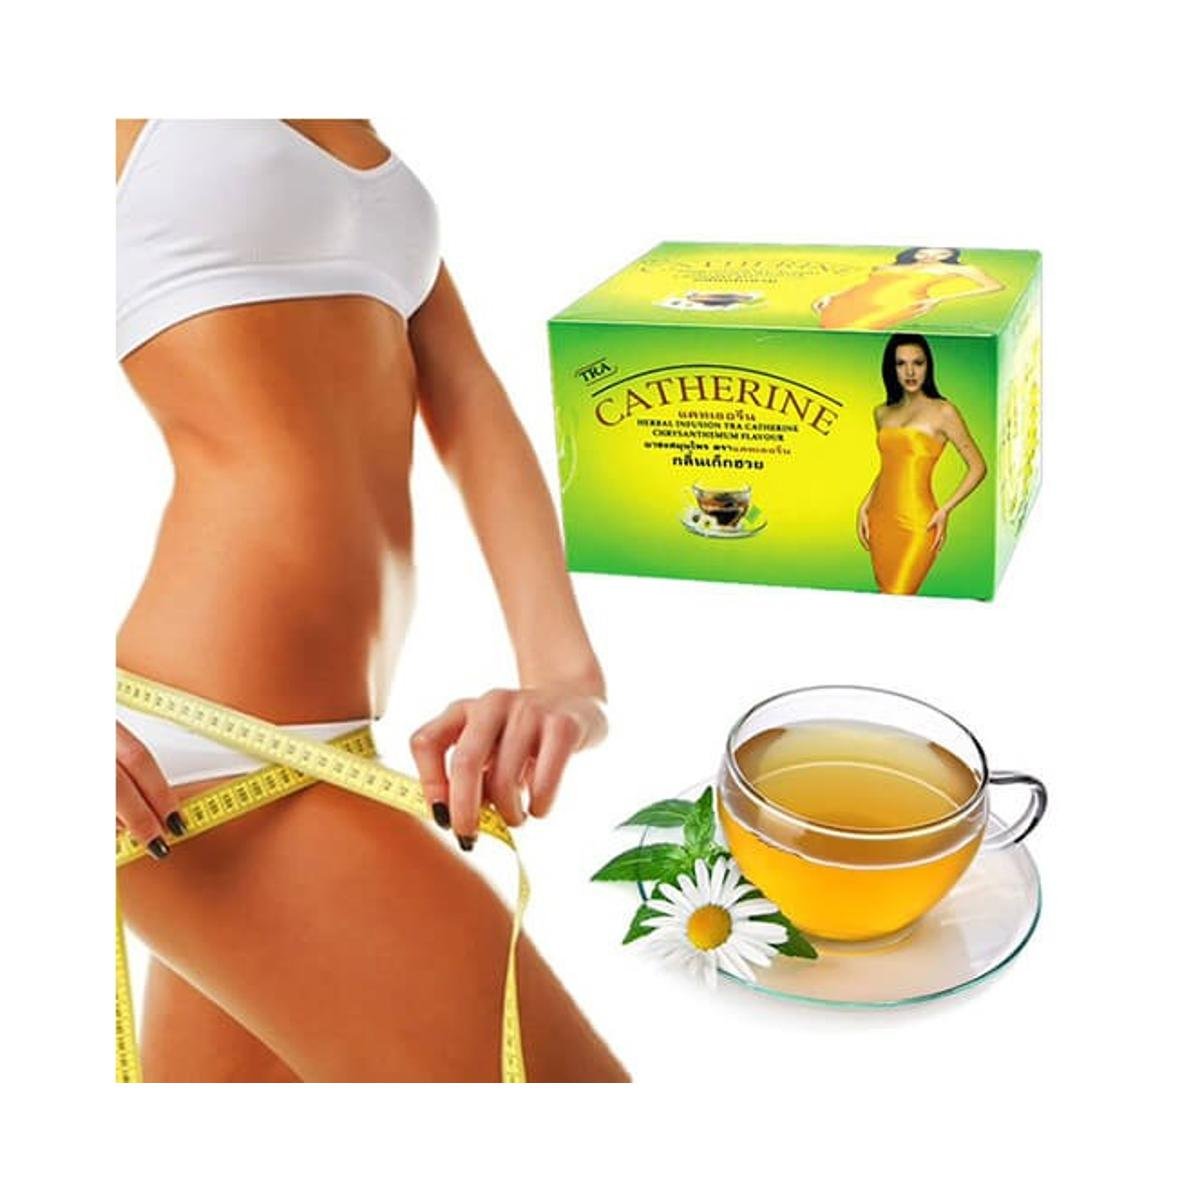 Buy Catherine Slimming Tea Price In Pakistan at Rs. 1400 from Likeshop.pk